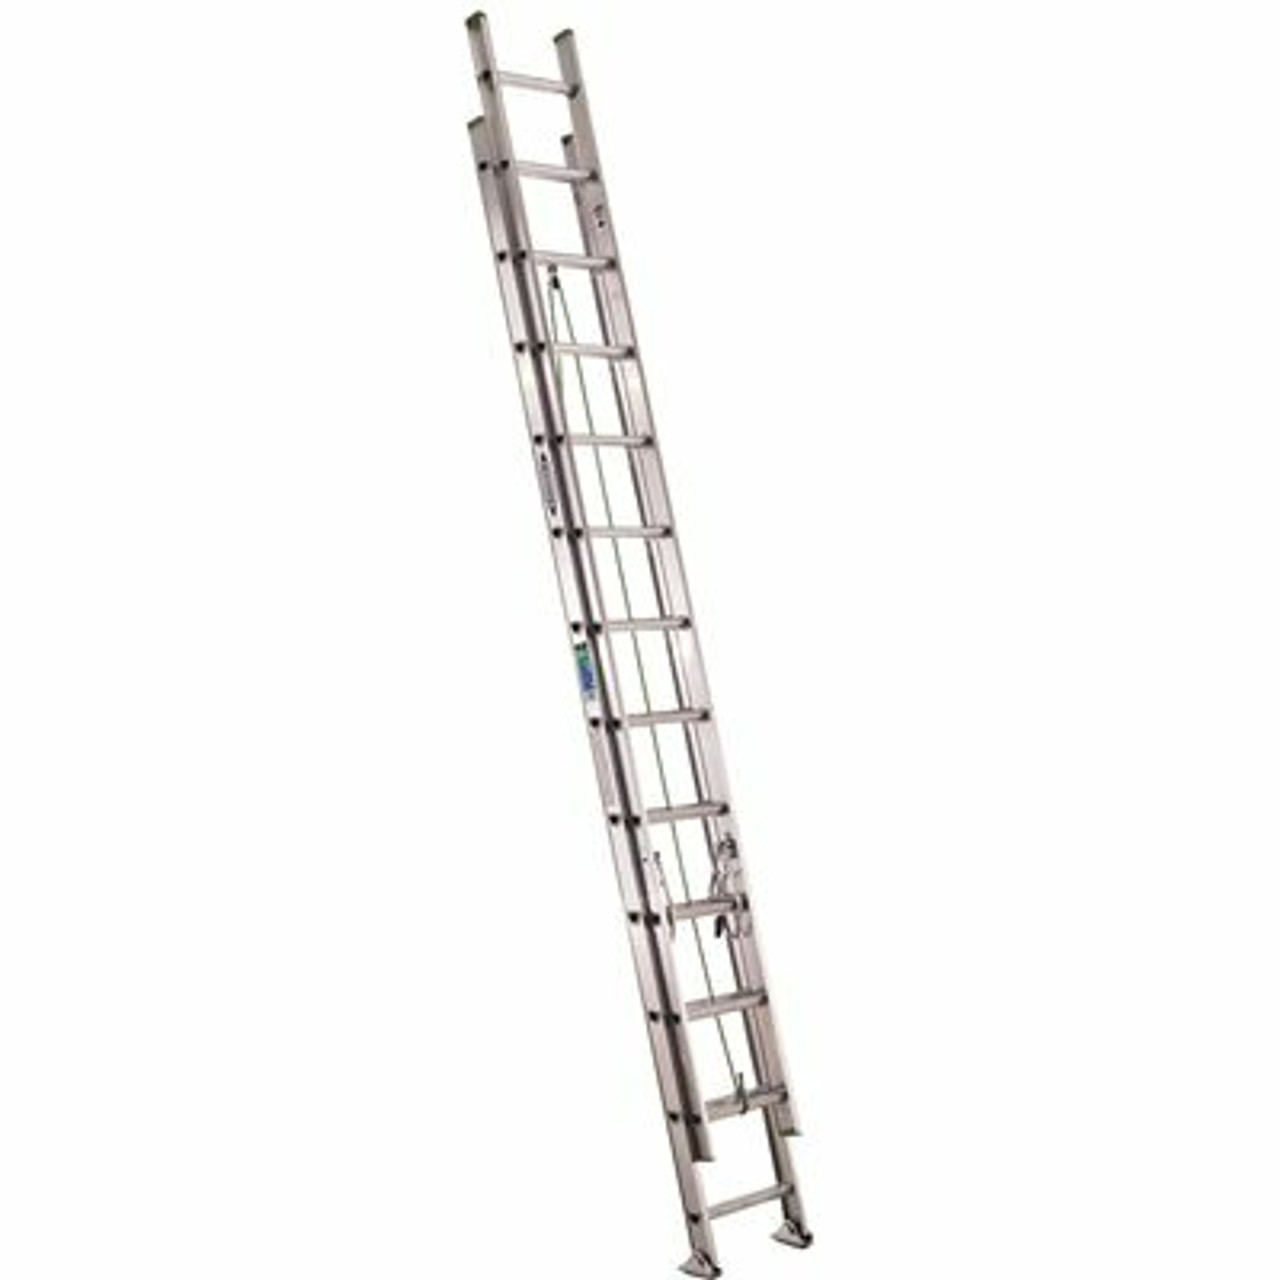 Werner 24 Ft. Aluminum Extension Ladder With 225 Lbs. Load Capacity Type Ii Duty Rating